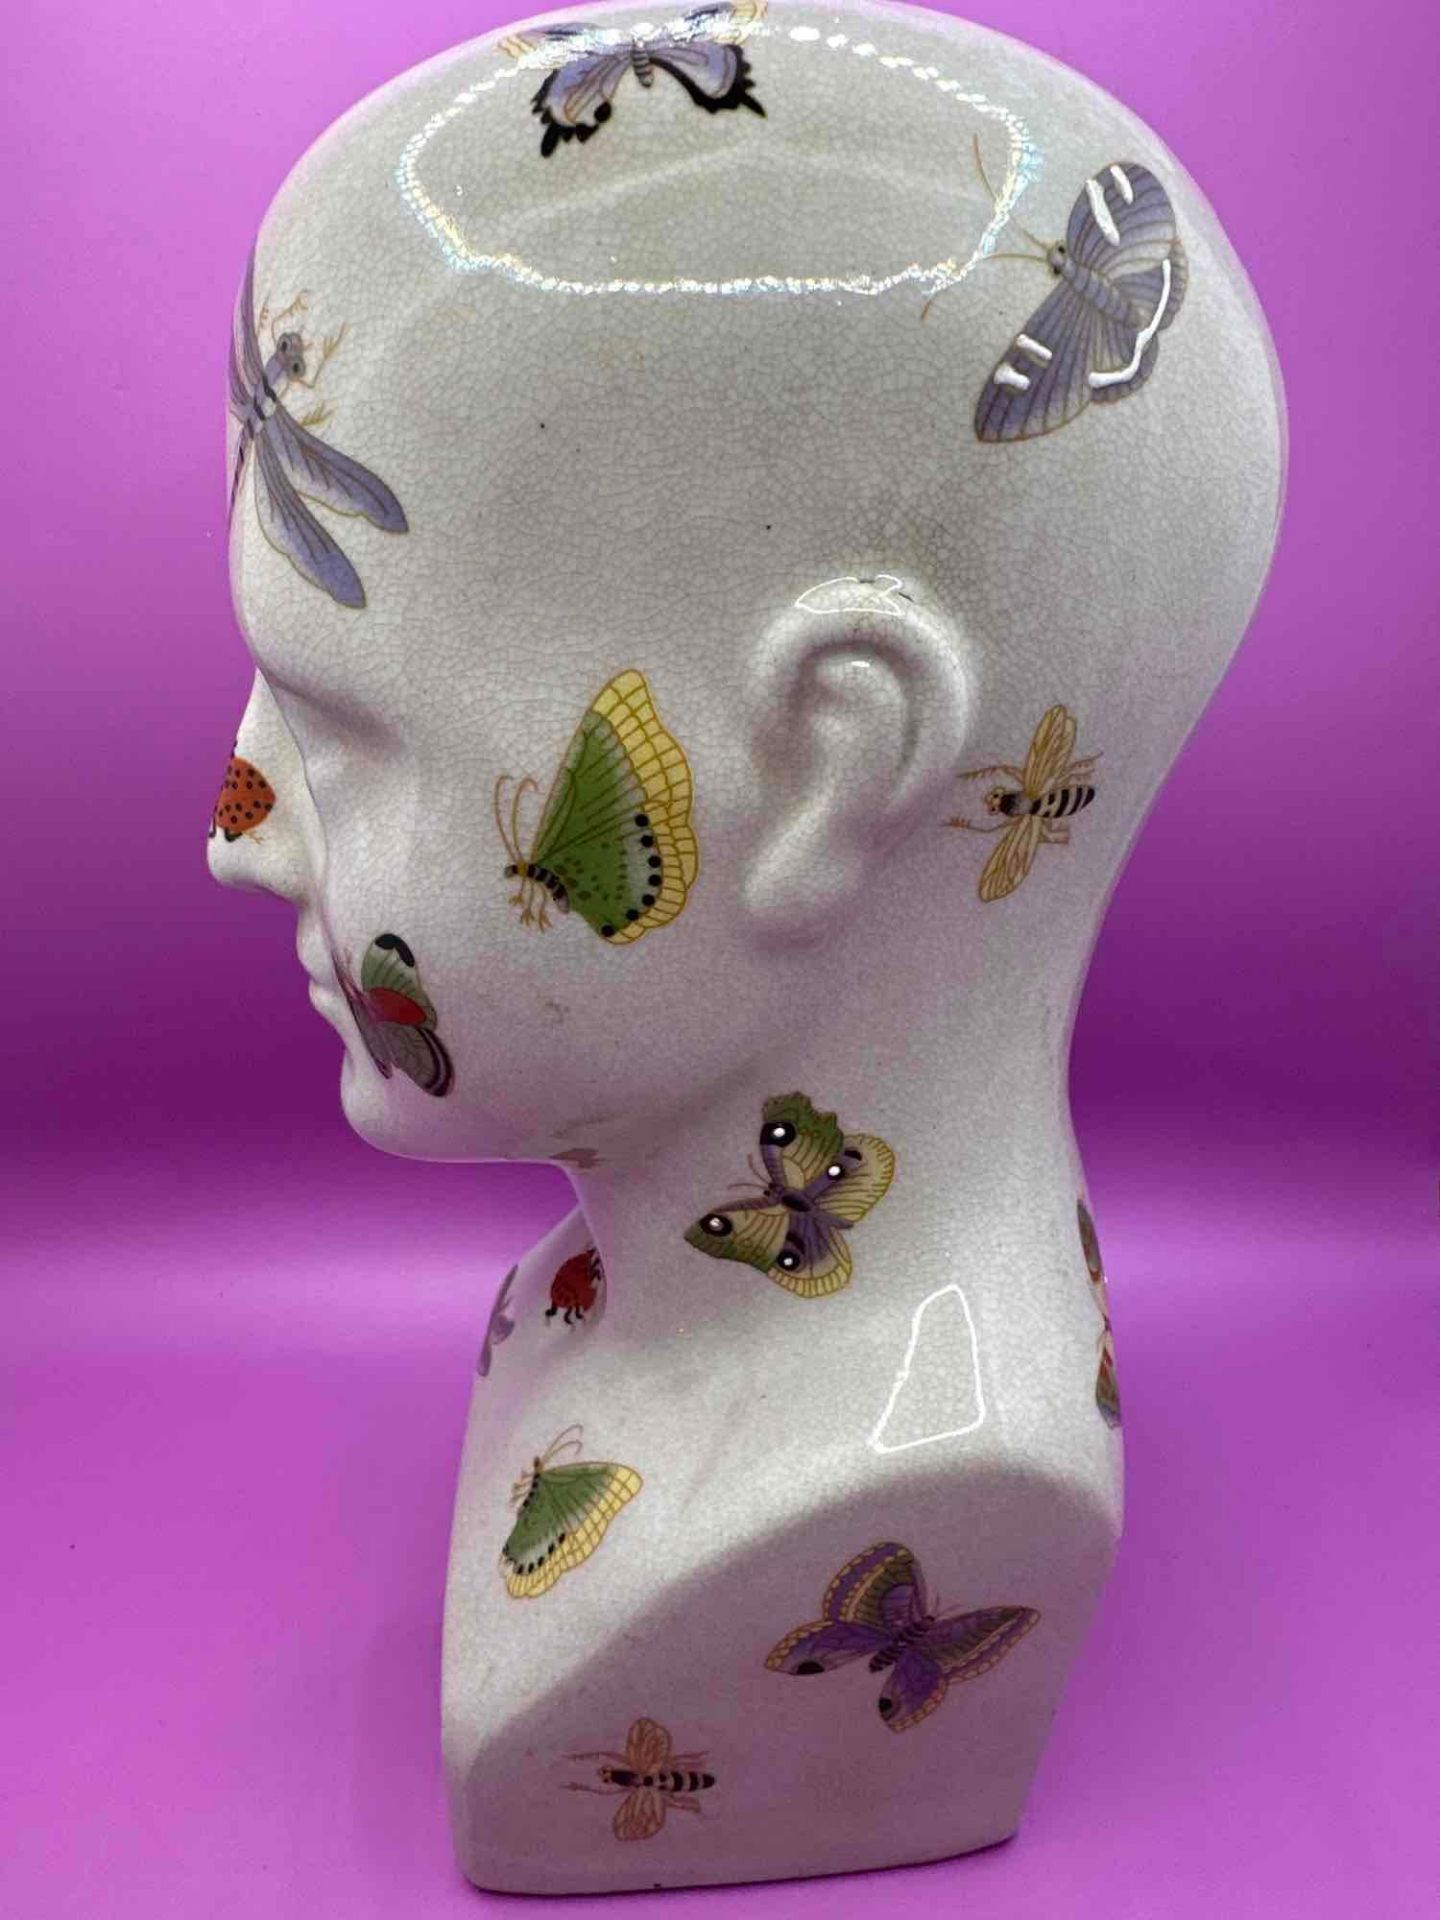 Ceramic Phrenology Head Adorned With A Colourful Colony Of Winged Insects: Bees, Butterflies, - Image 4 of 4